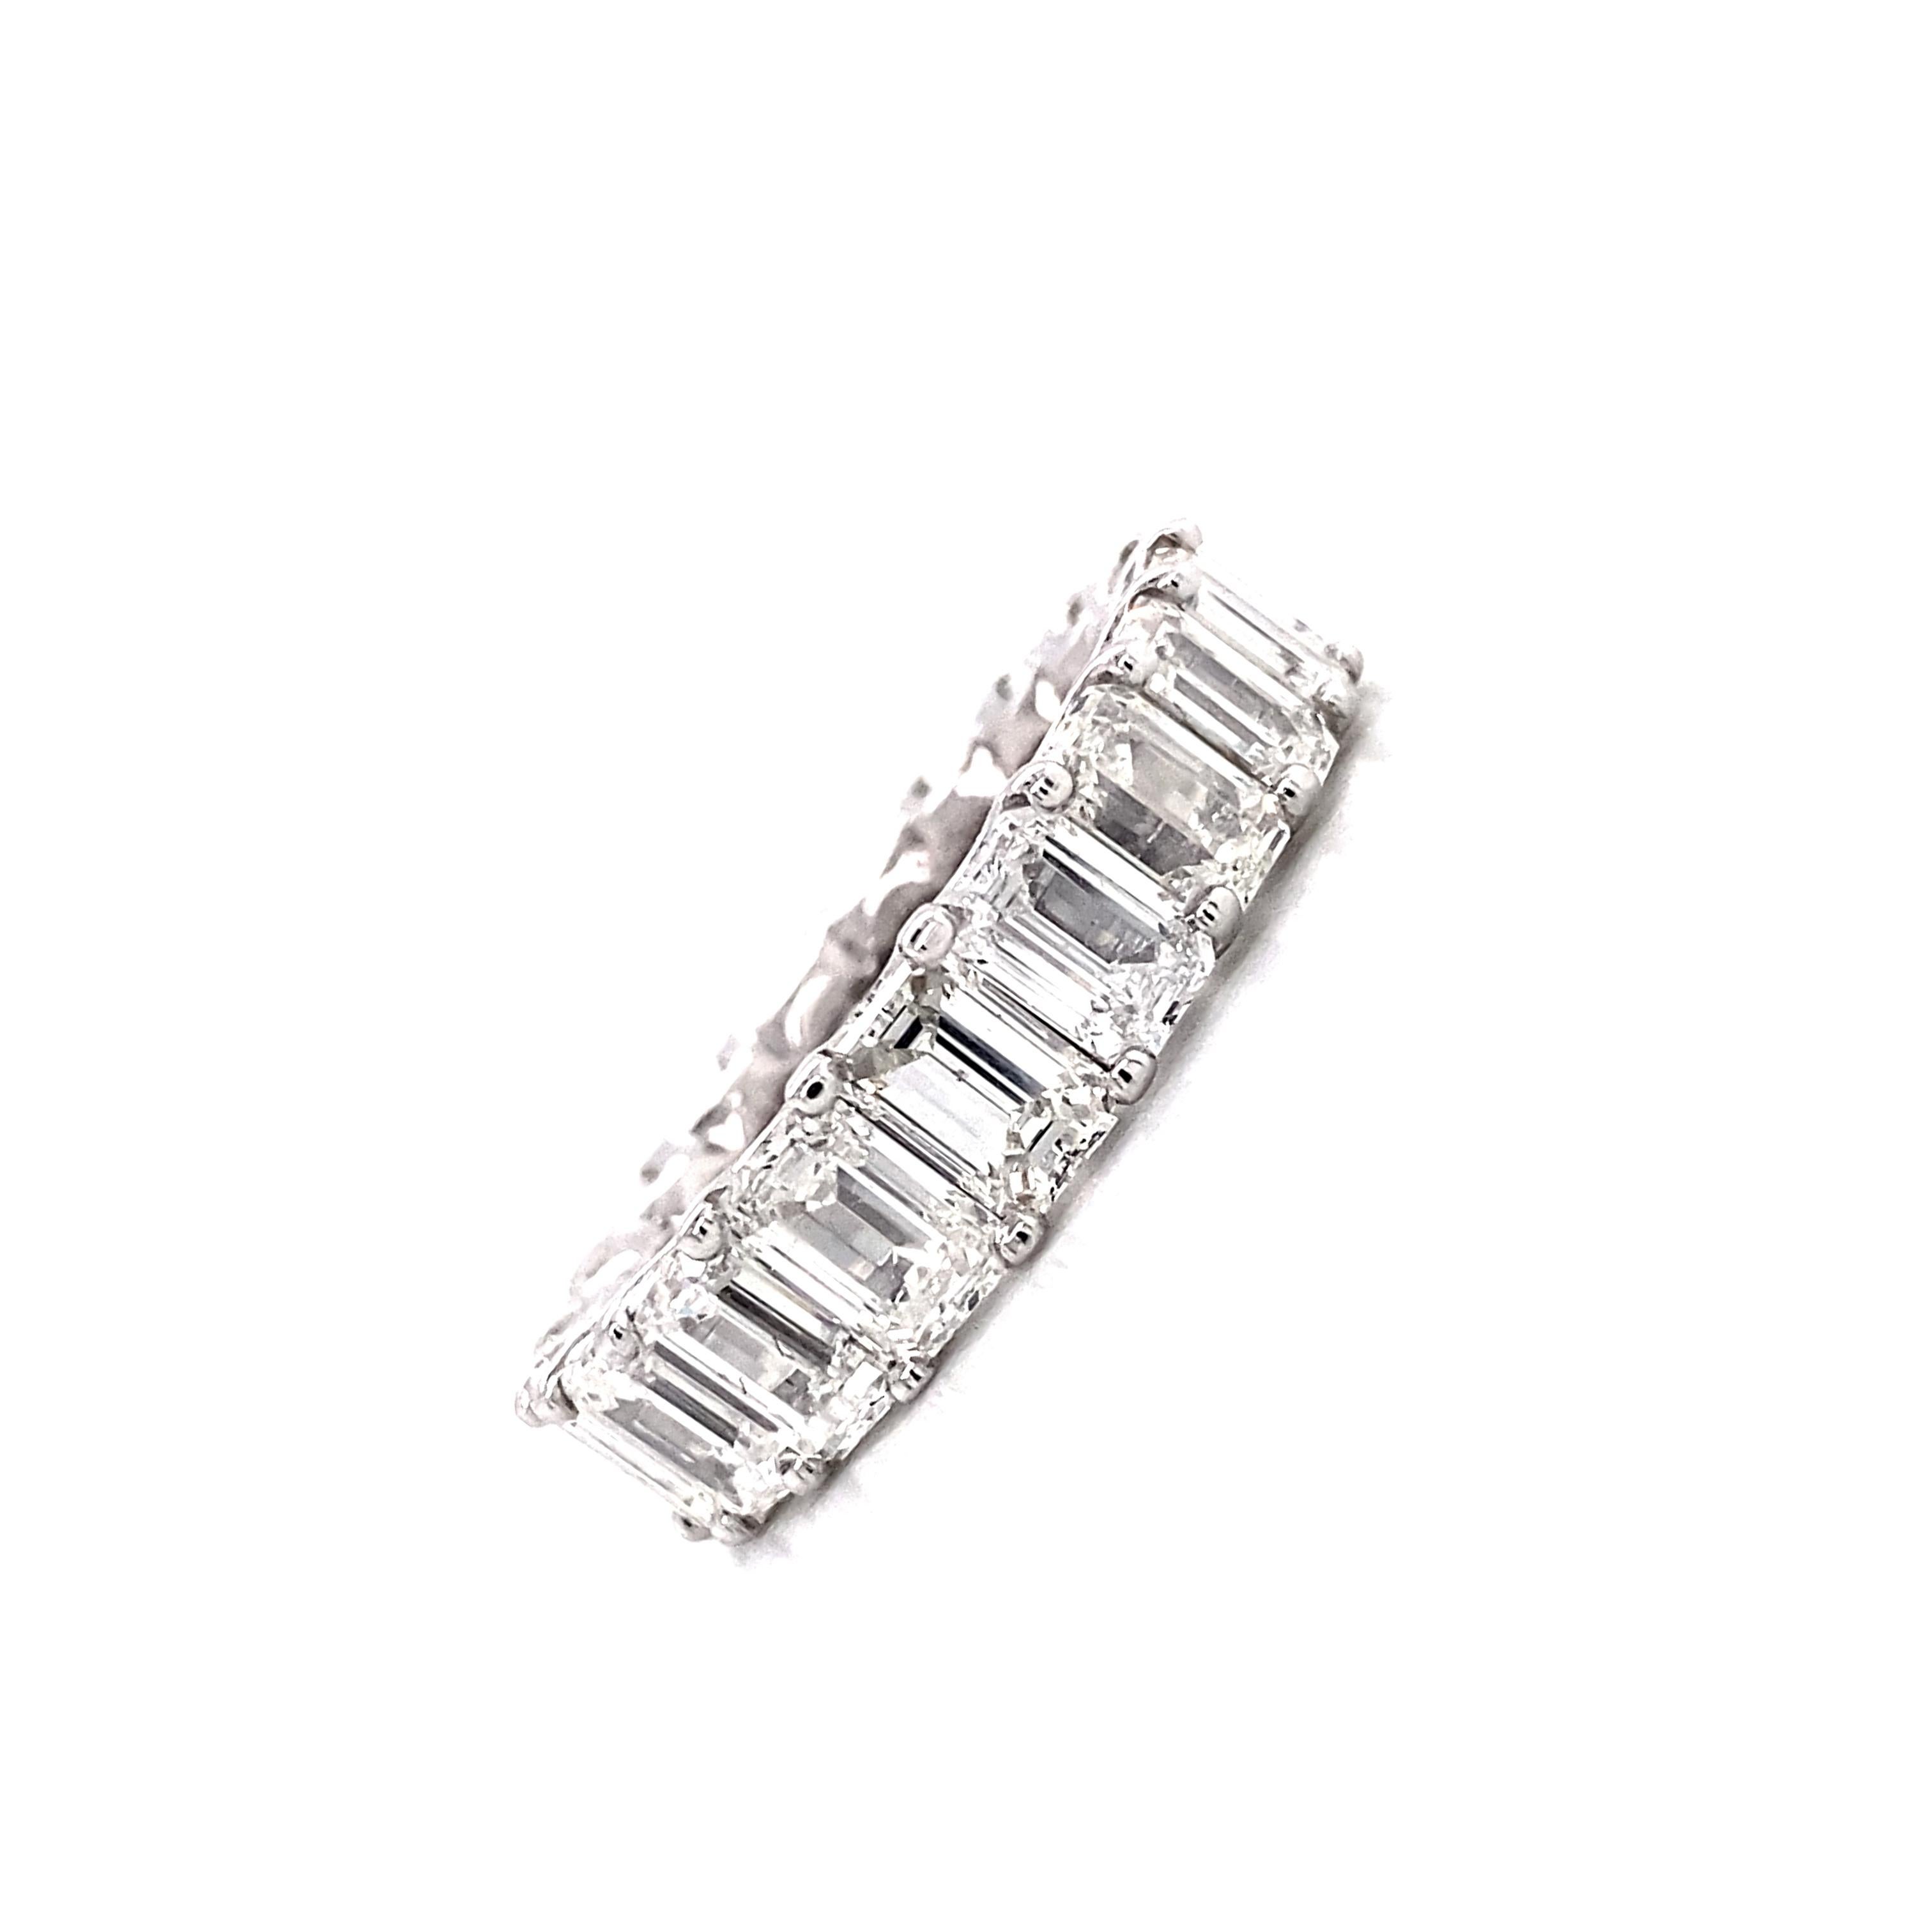 Emerald Cut Diamond Eternity Band

The diamond eternity ring is an enduring emblem of commitment and love, and its emerald cut shape pattern offers a slightly unique twist to this timeless piece. This large diamond eternity ring features a full